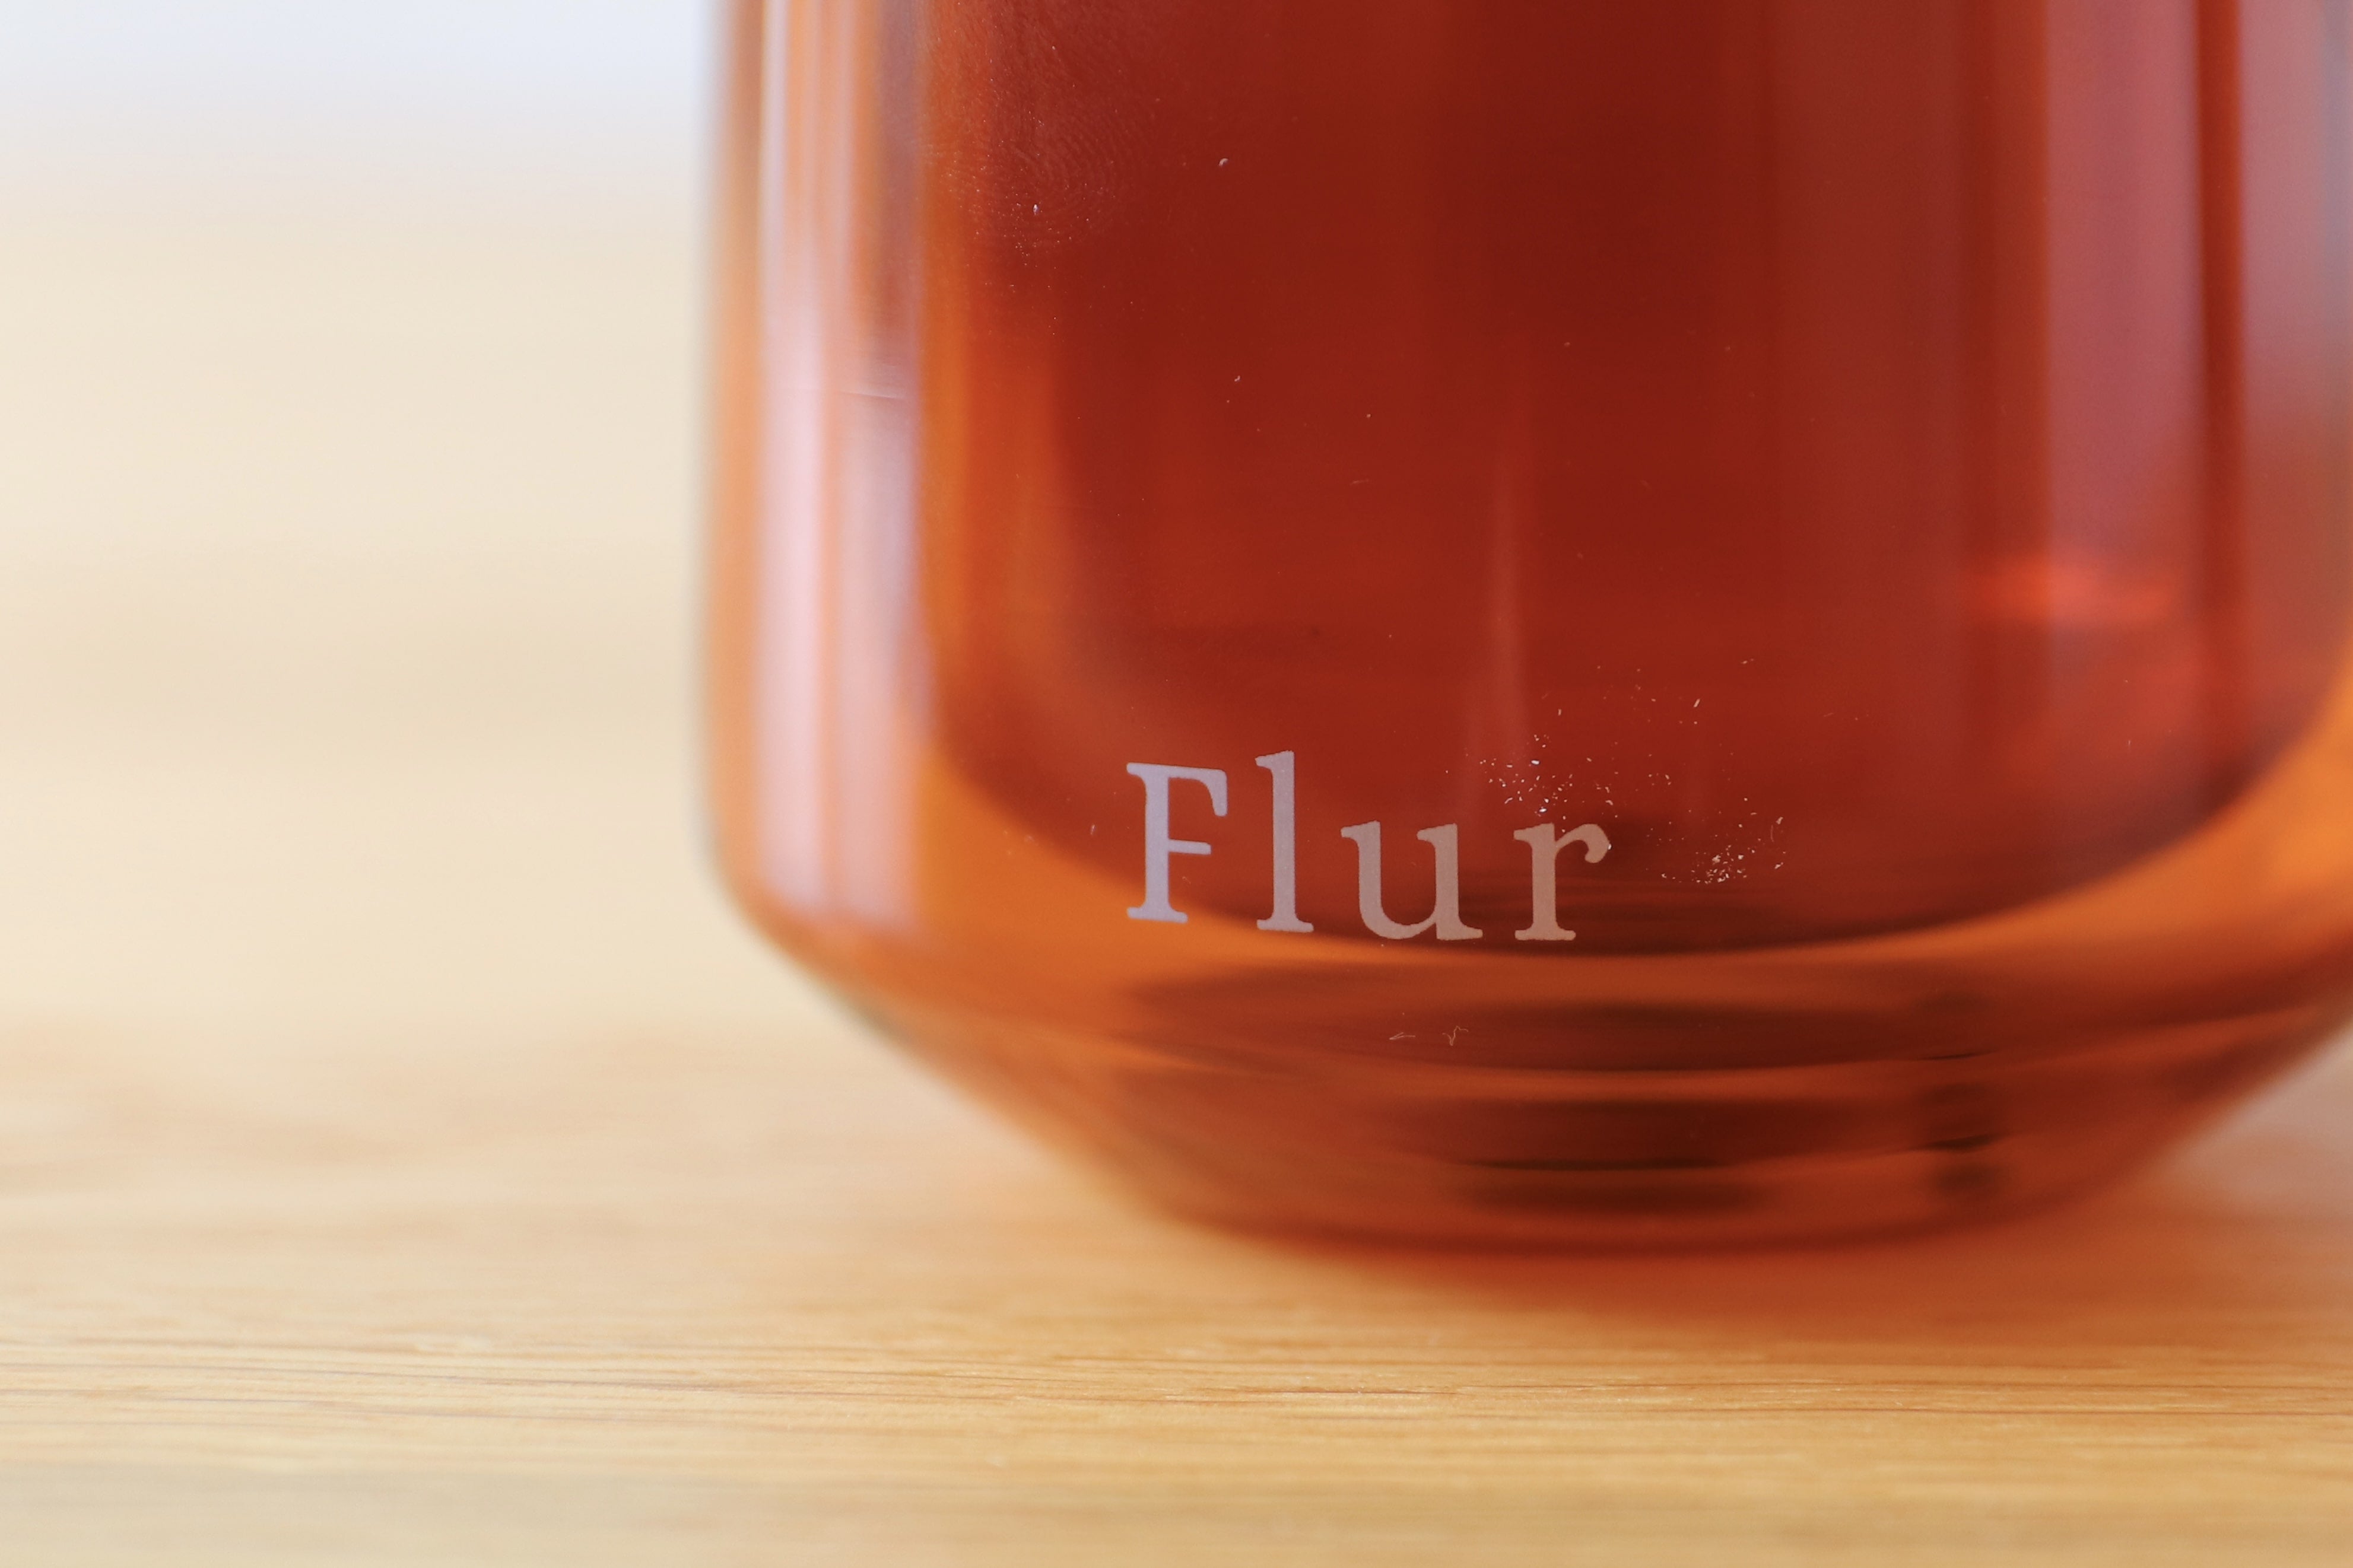 Lets try my new cup from flur glassware #teatime #coffee #espresso